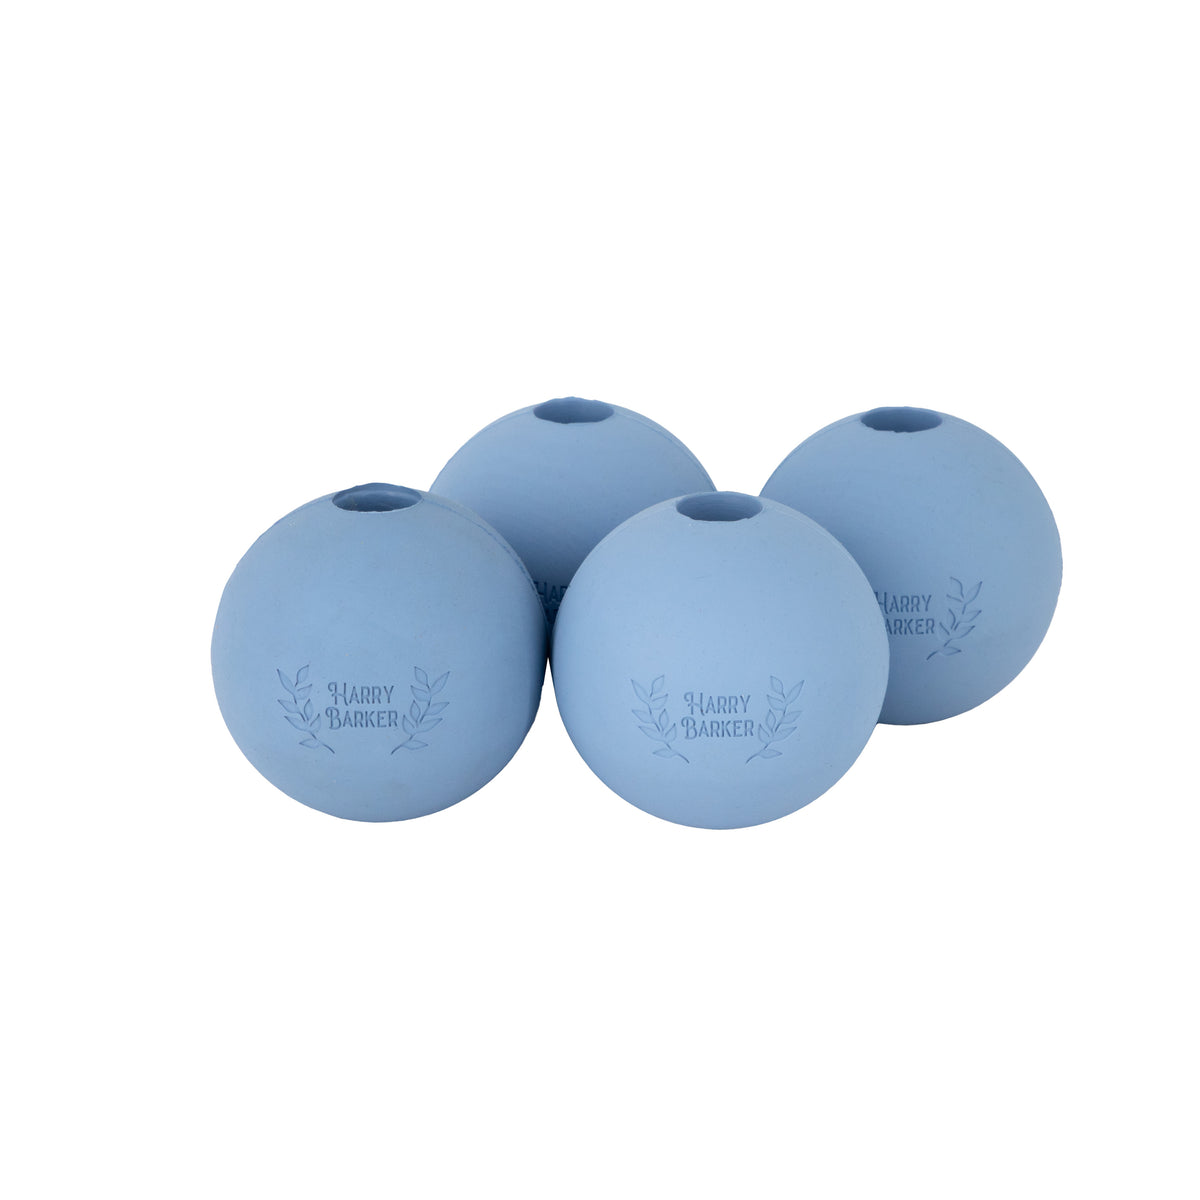 3 Inch Value Pack Rubber Balls